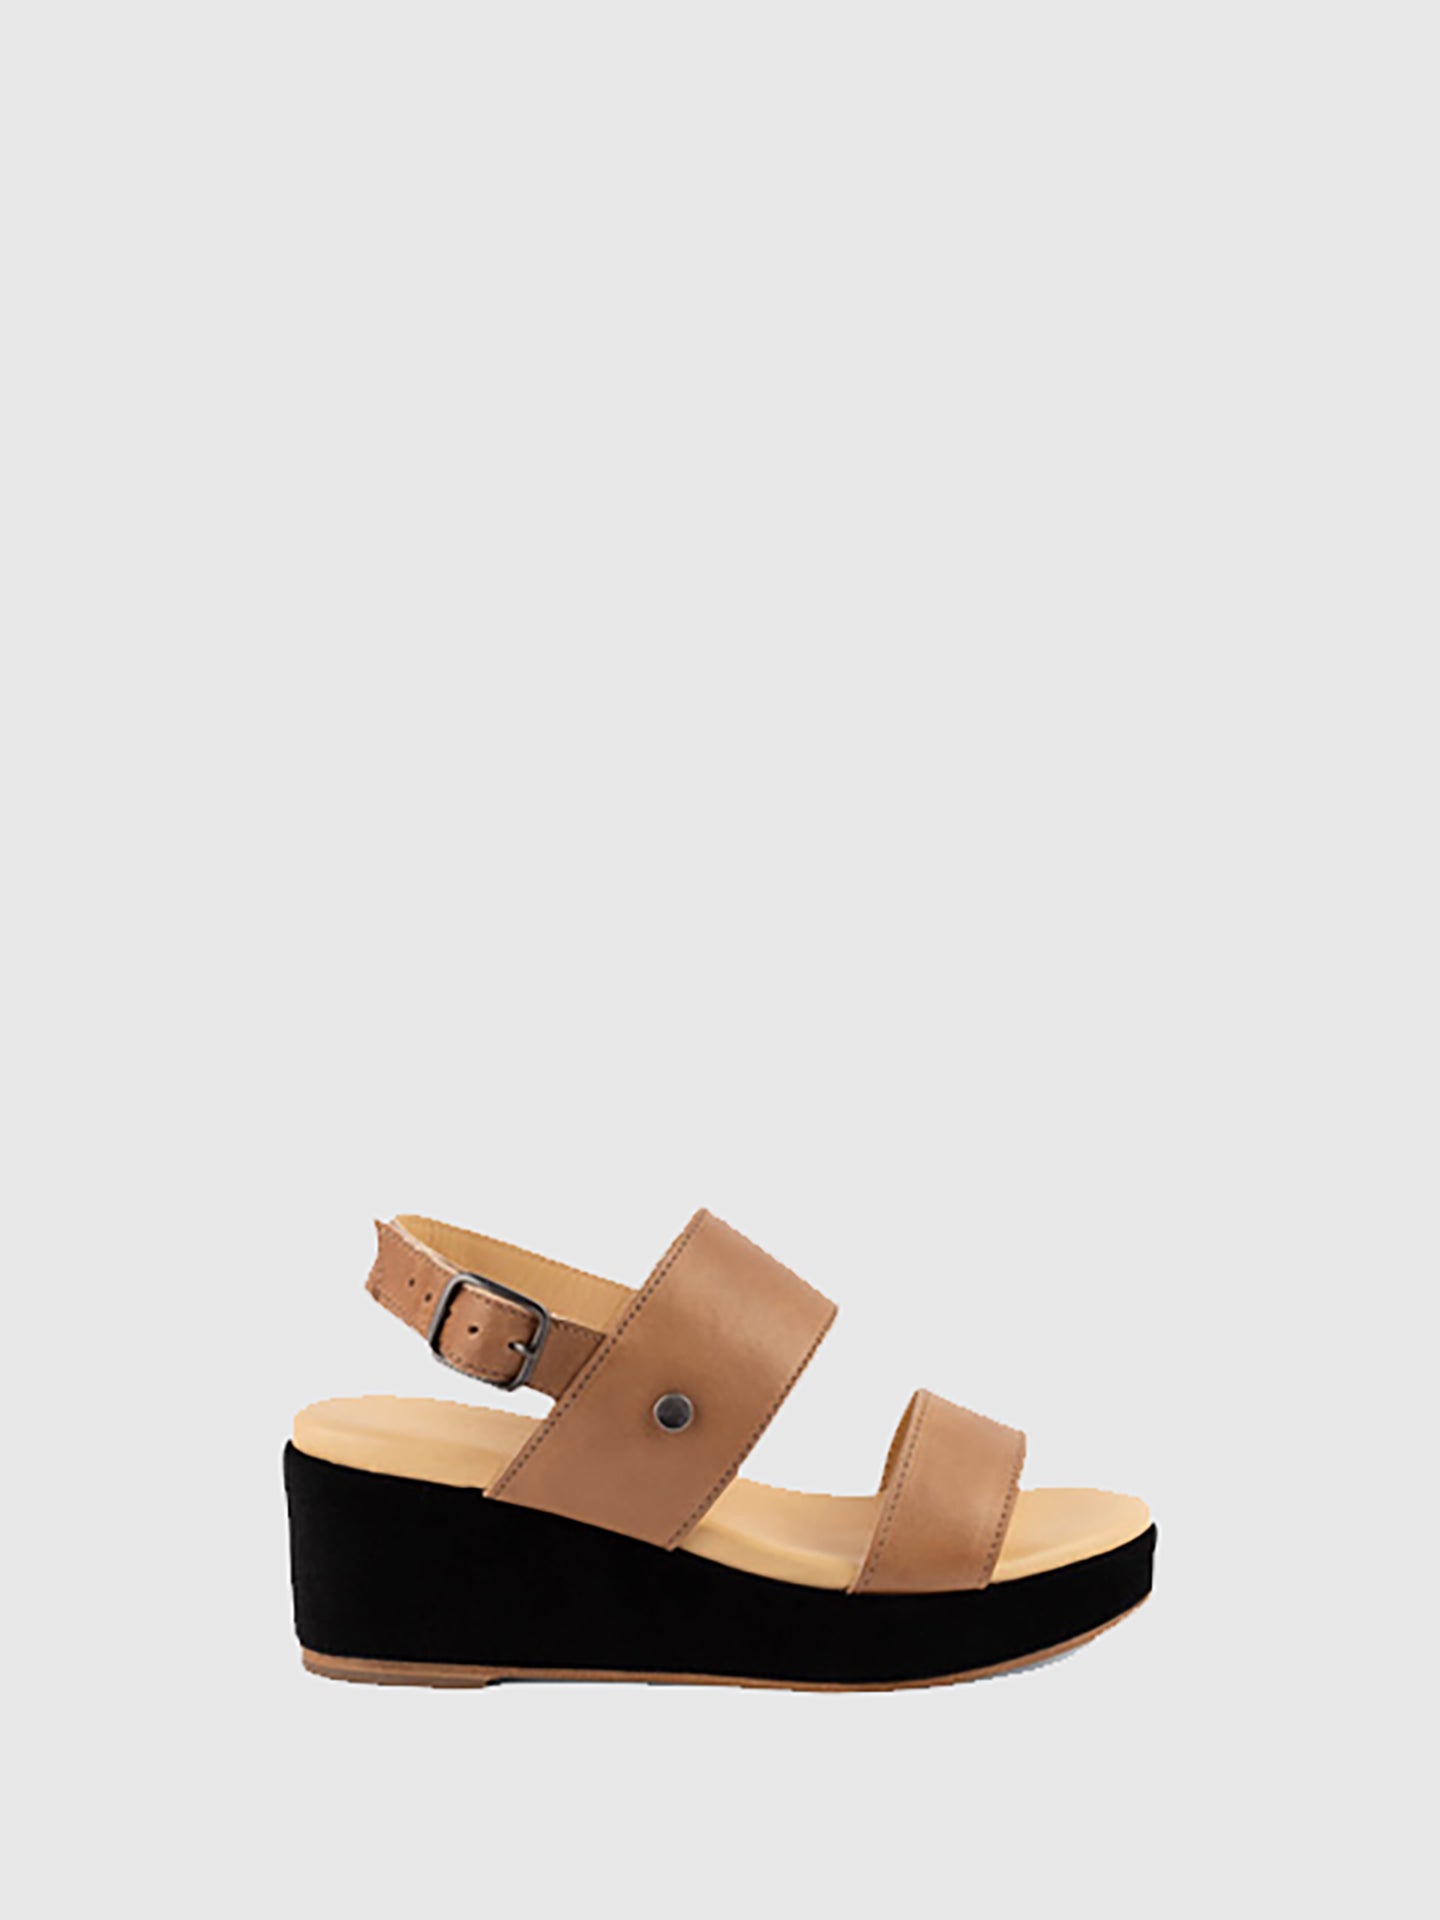 Only2me Beige Wedge Sandals